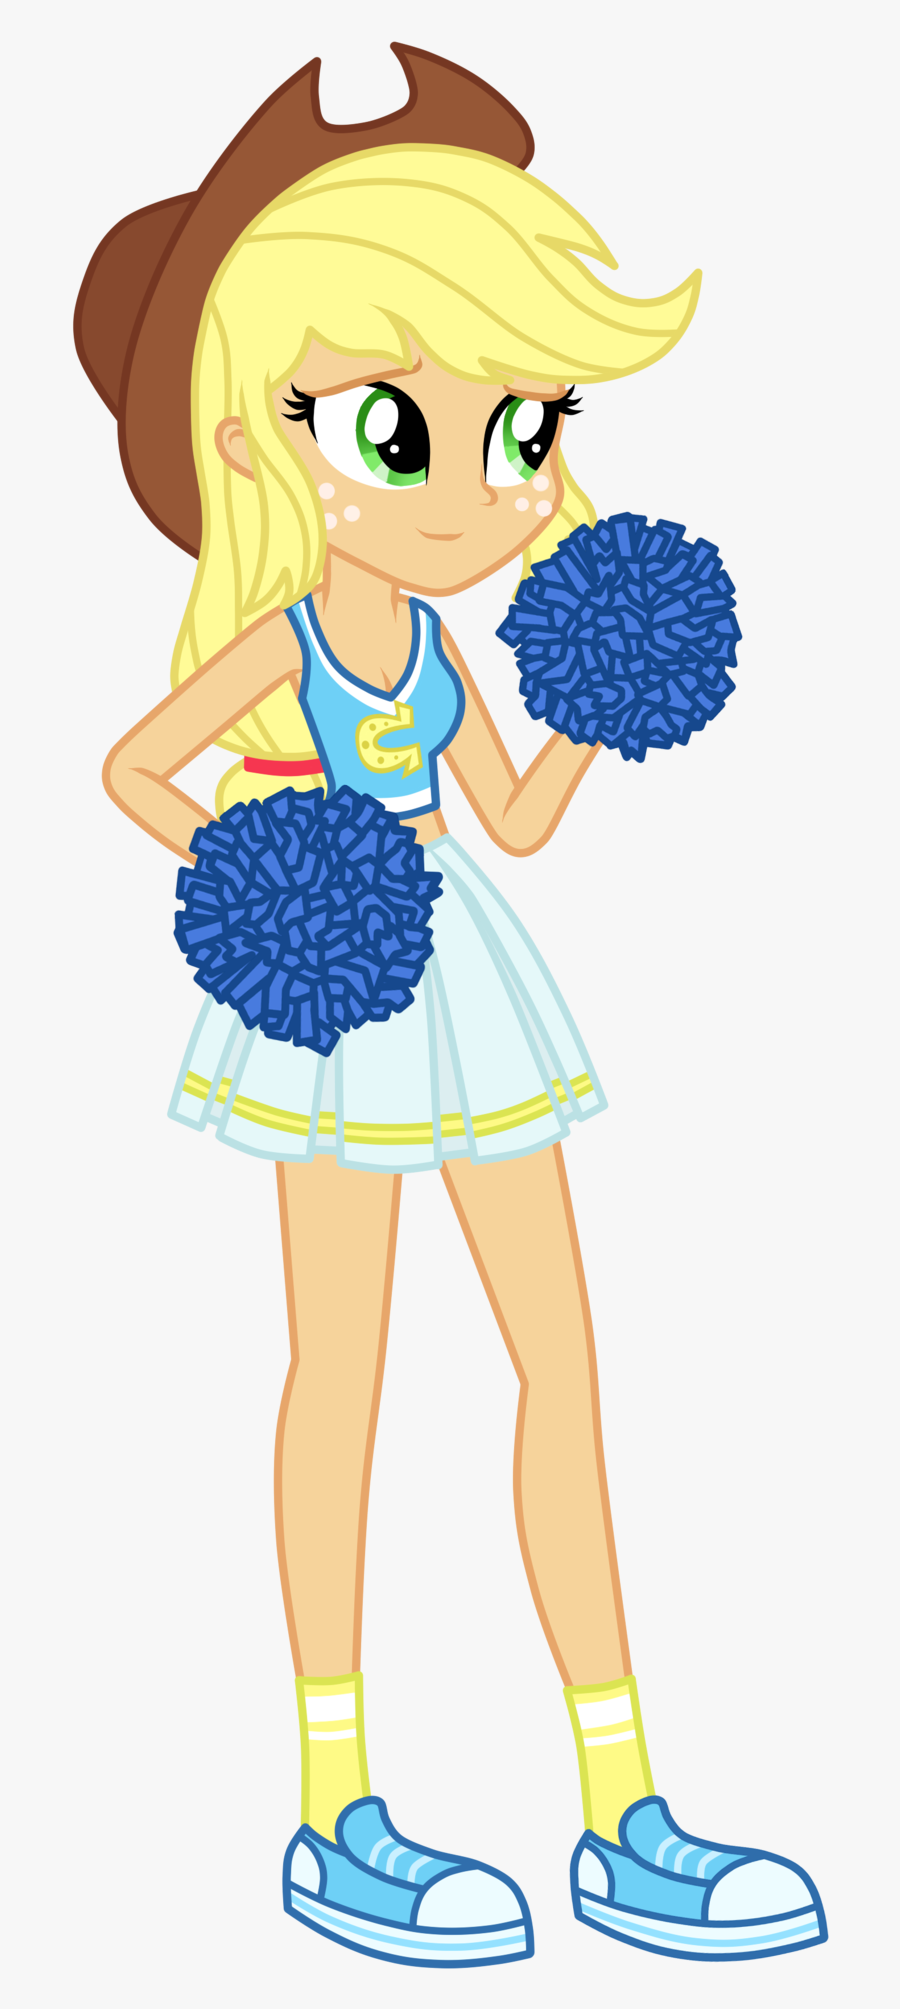 Transparent Unicorn Clipart Png - My Little Pony Equestria Girls Cheerleader, Transparent Clipart